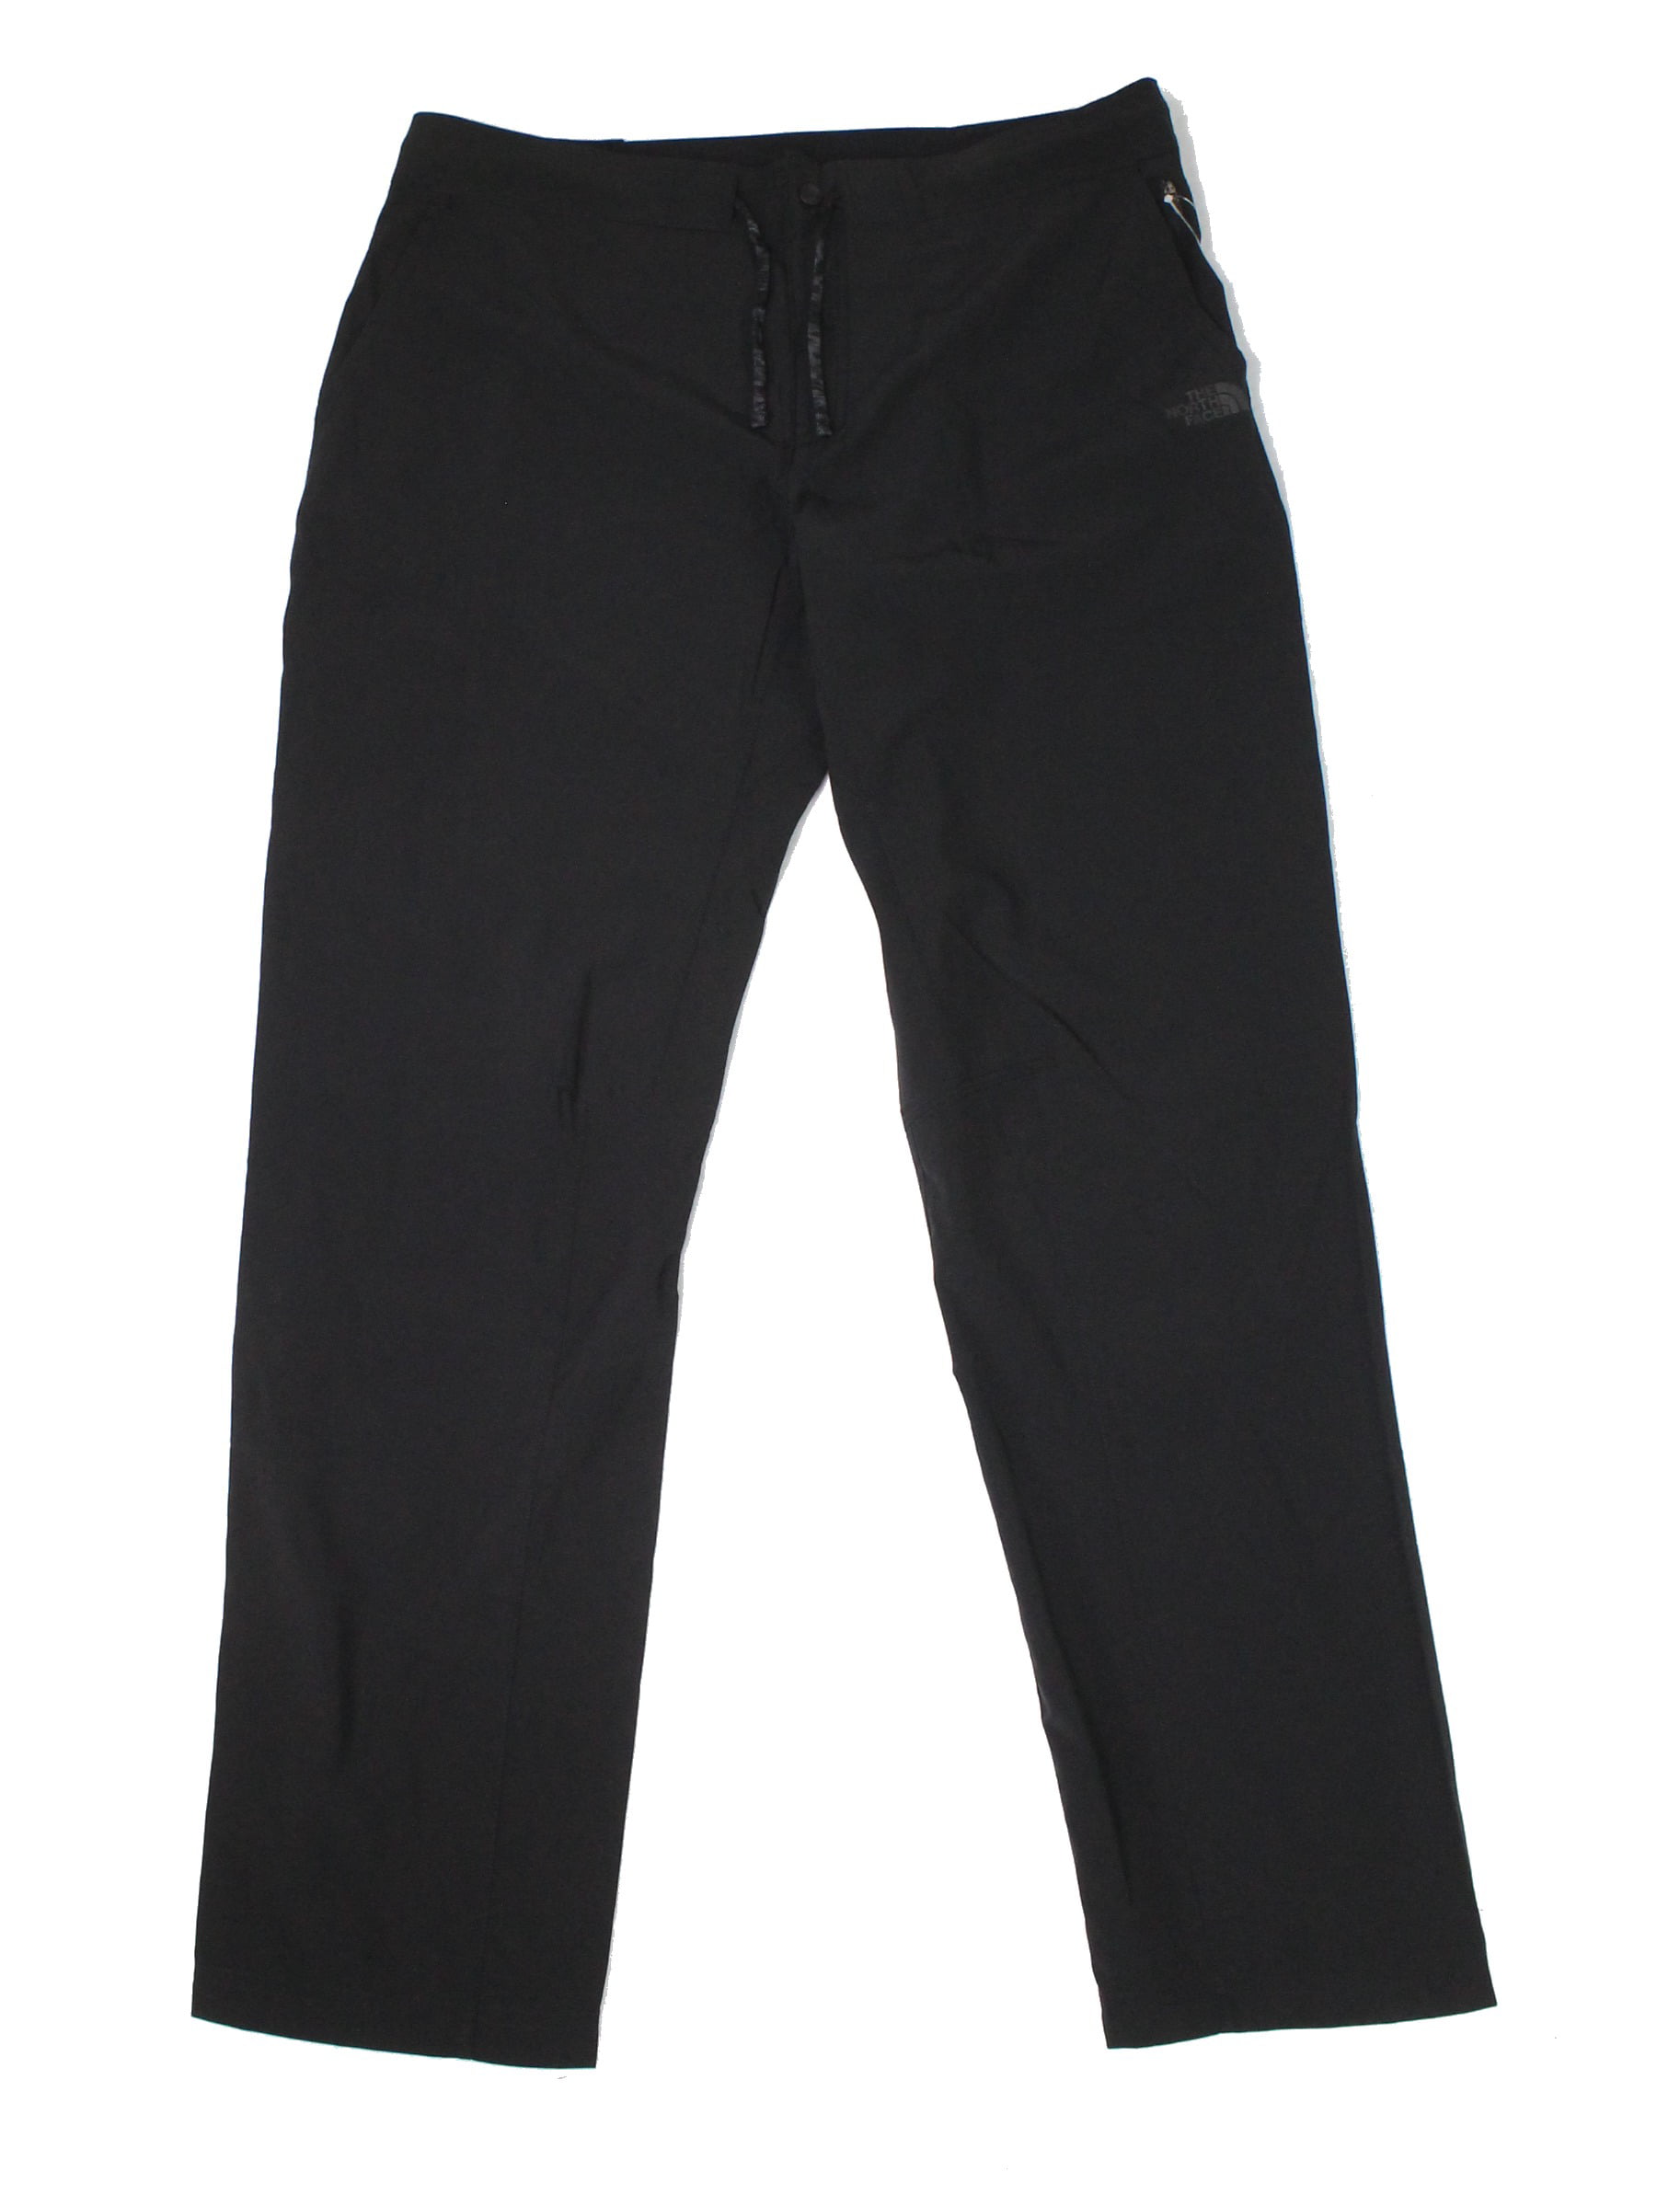 The North Face Activewear Bottoms - Mens Pants Large Activewear ...